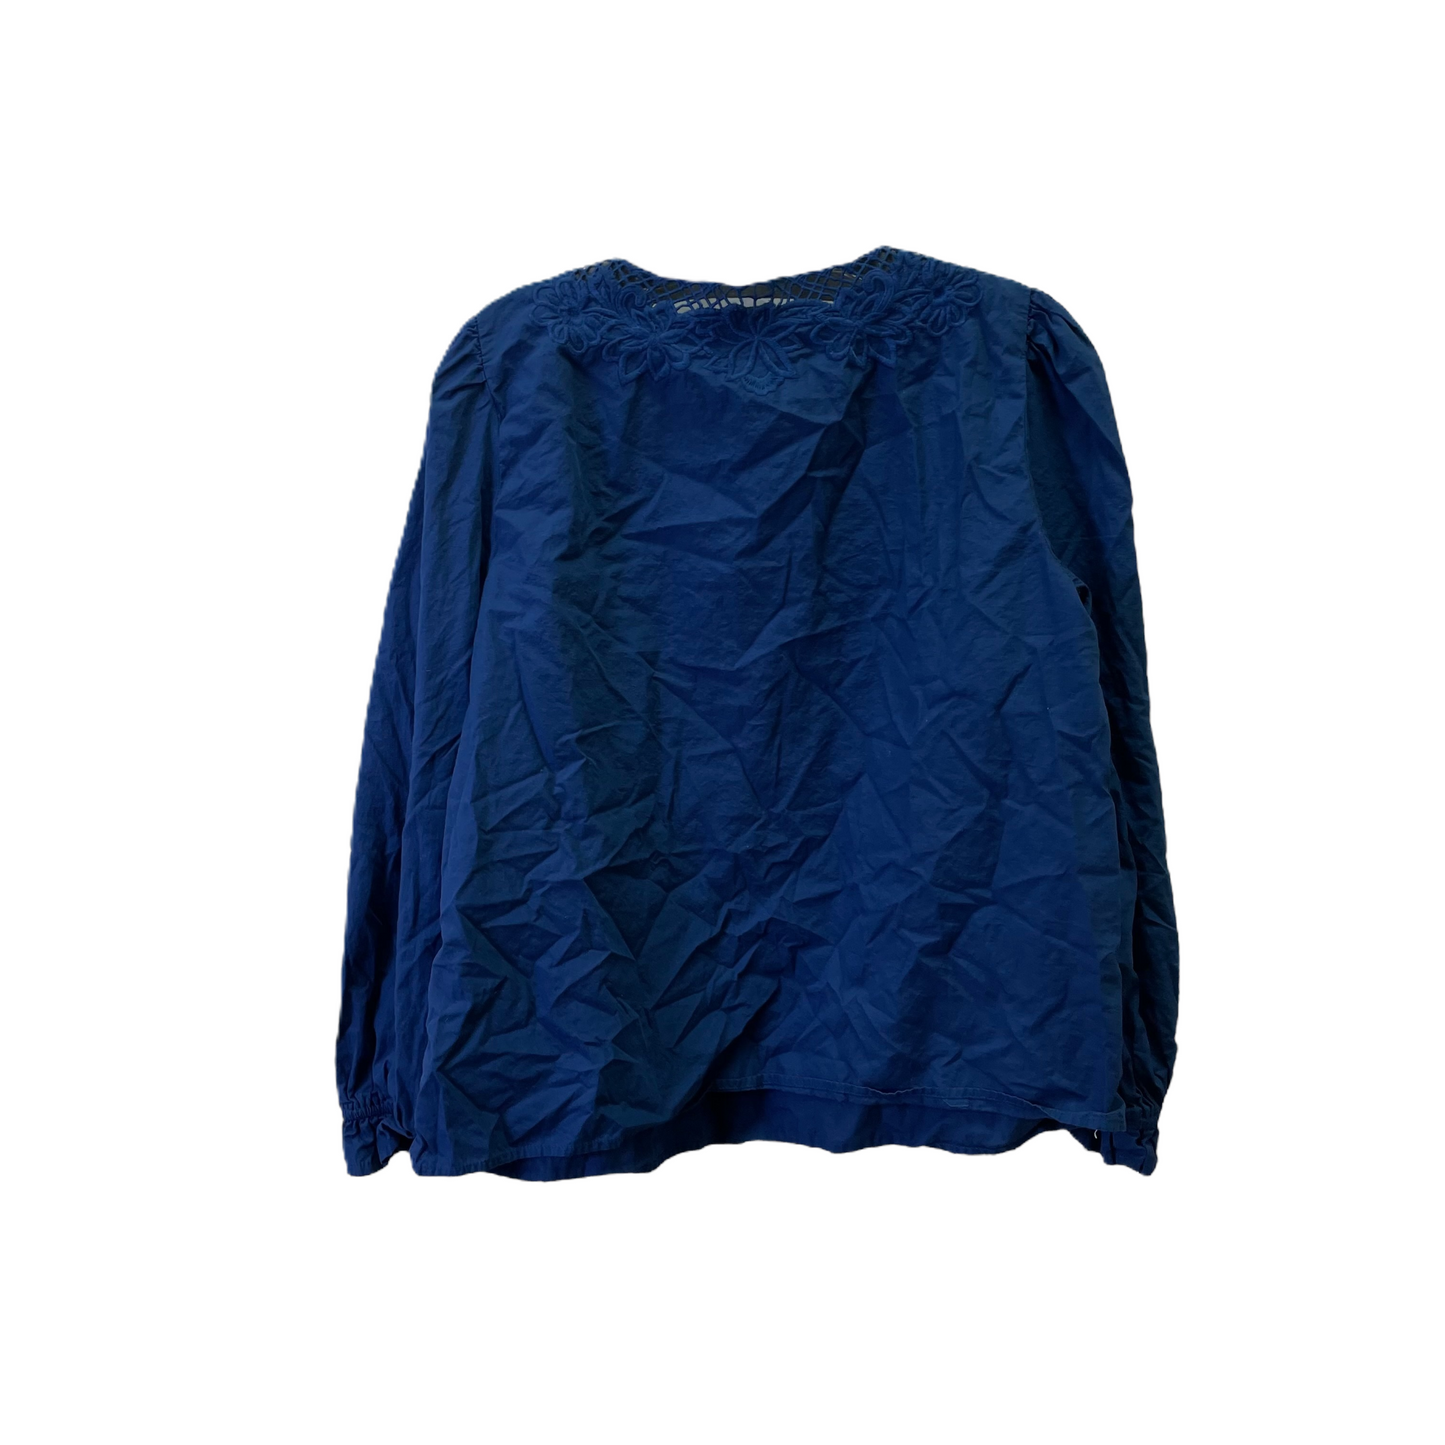 Blue Top Long Sleeve Basic By J. Crew, Size: M